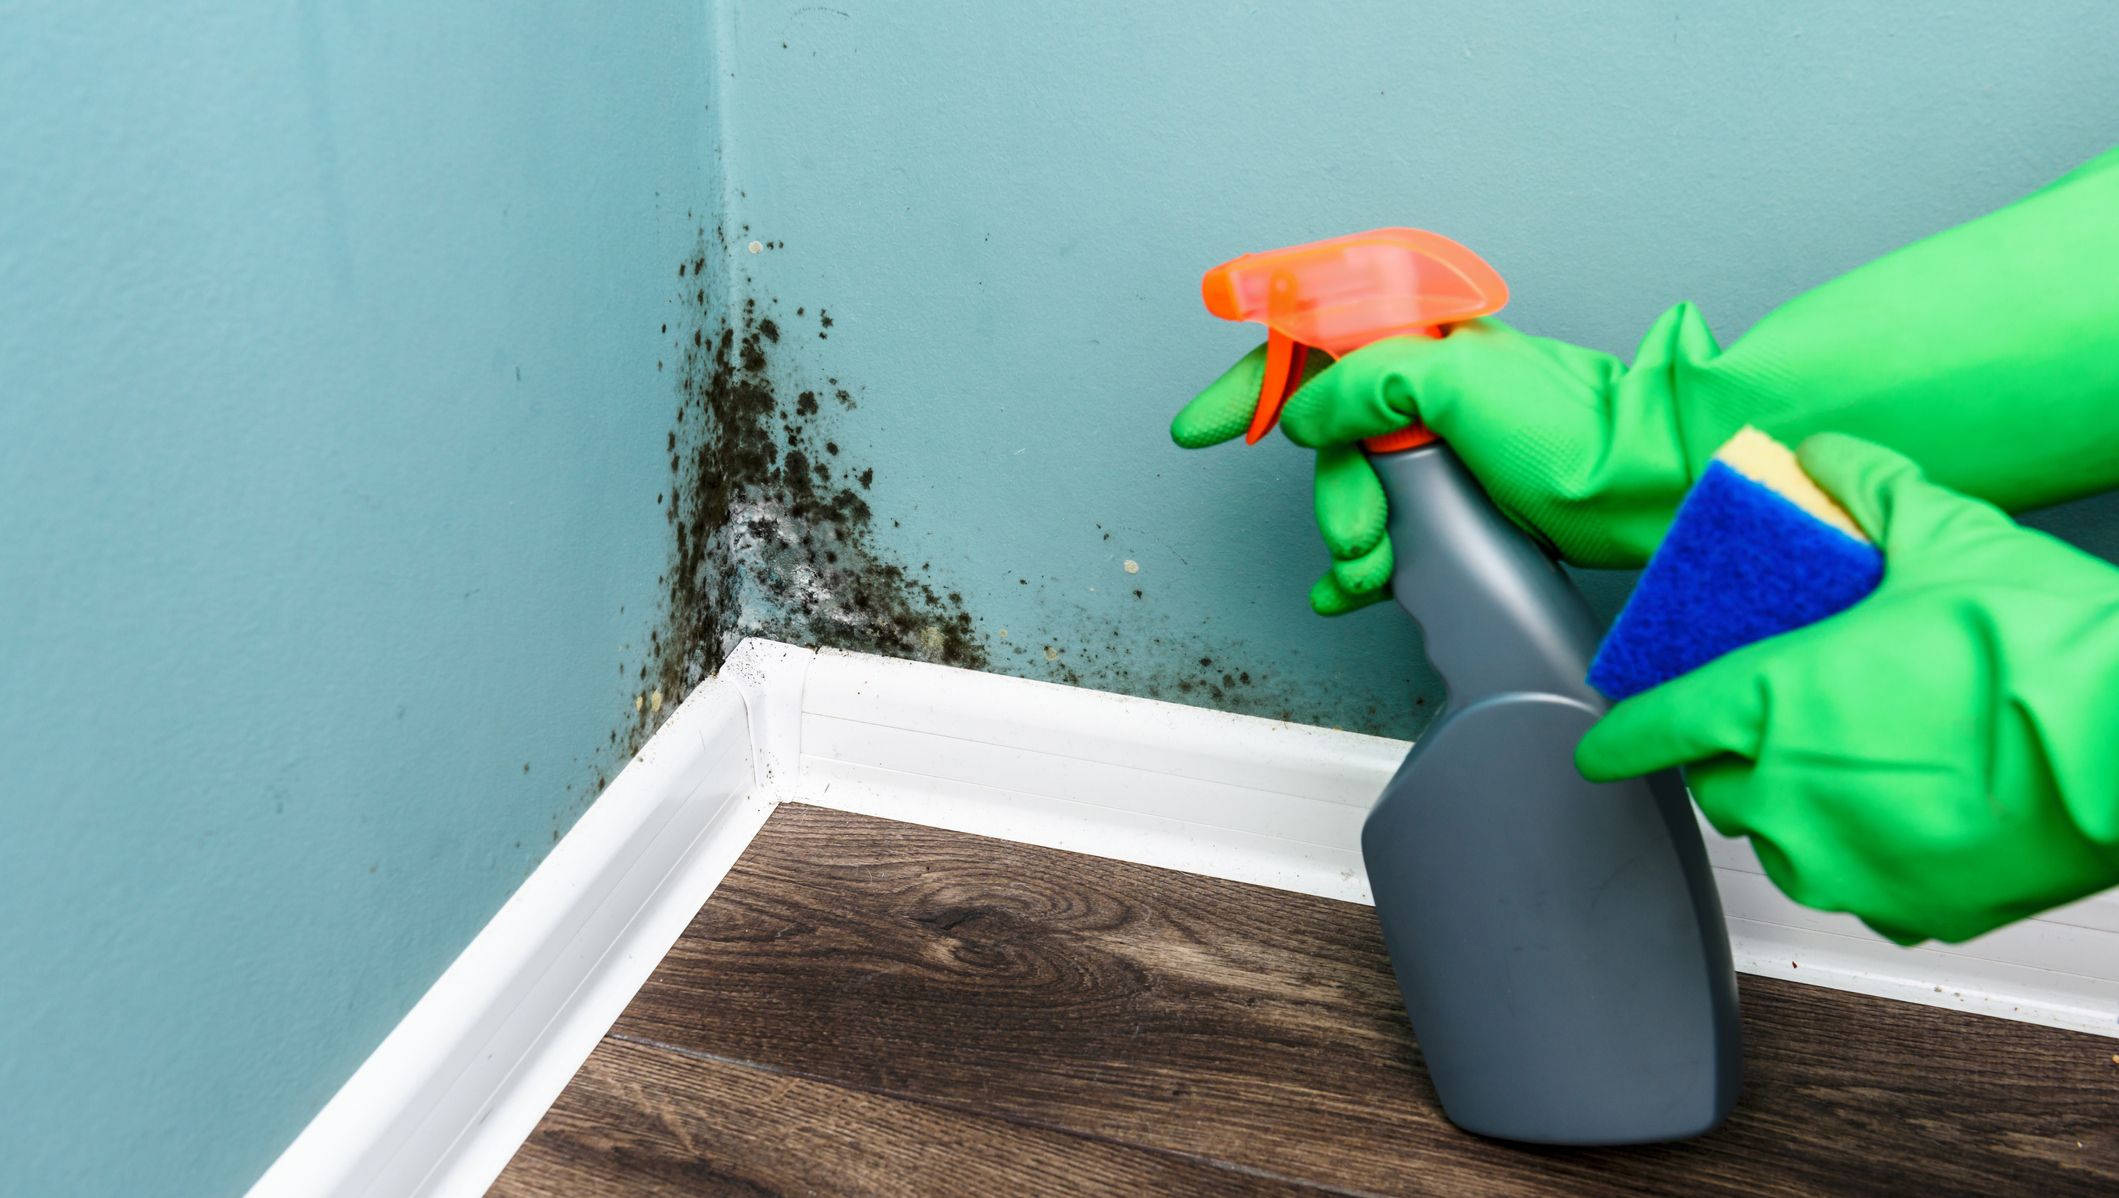 What Happens If You Eat Mold?